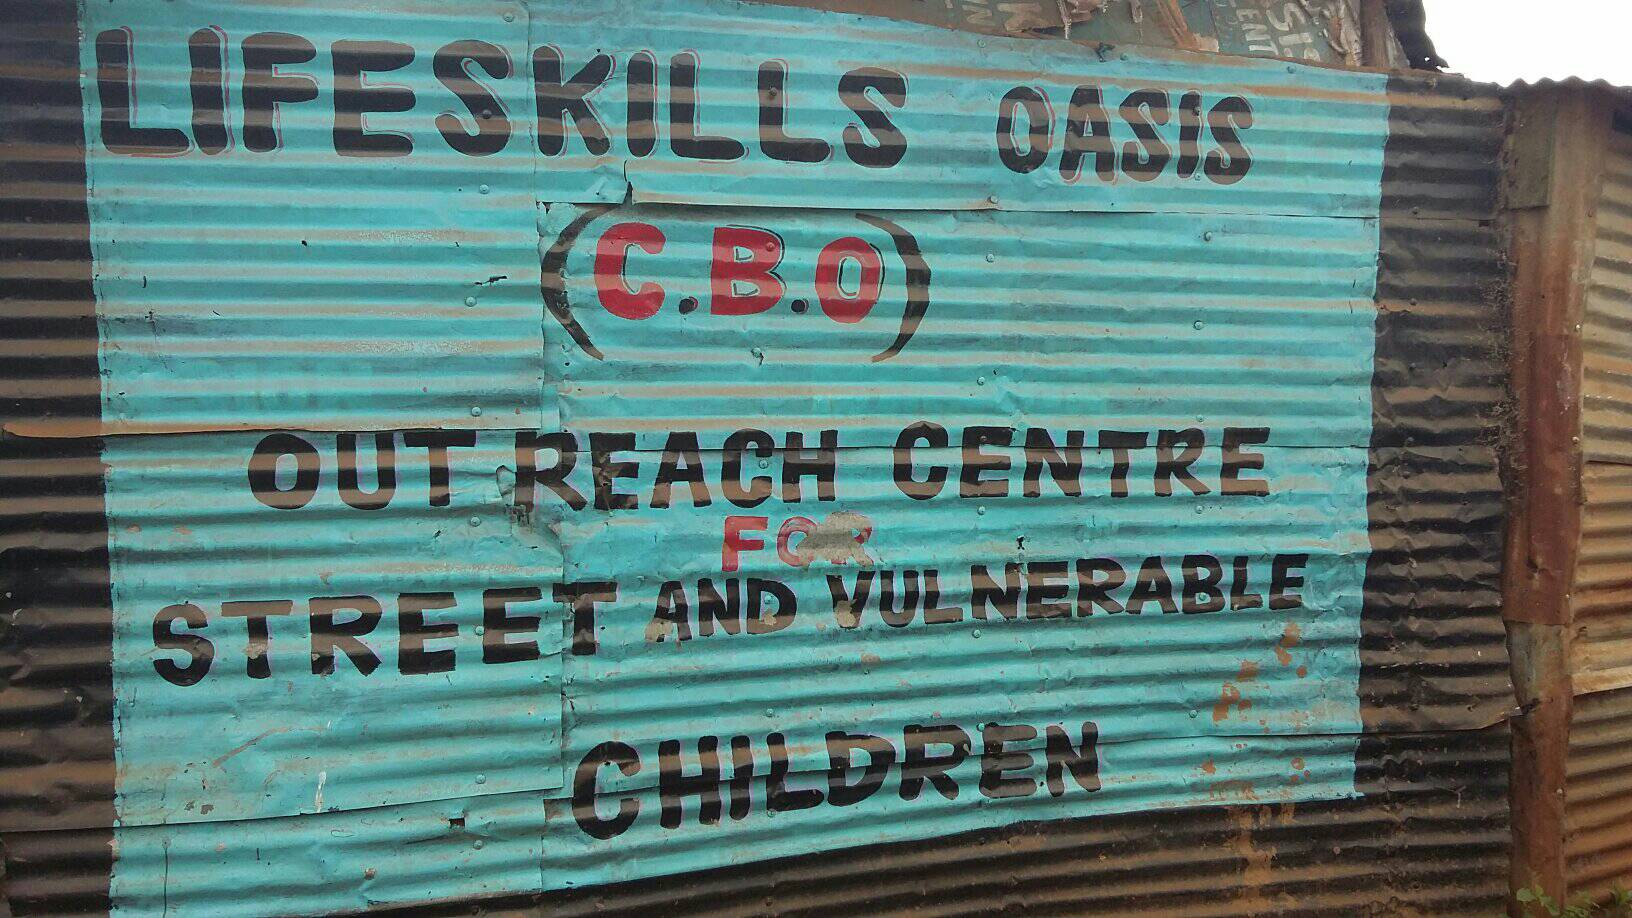 Image shows a corrugated iron fence painted with a blue square. The text drawn over the square says: Life Skills Oasis (C.B.O.) outreach centre for street and vulnerable children.